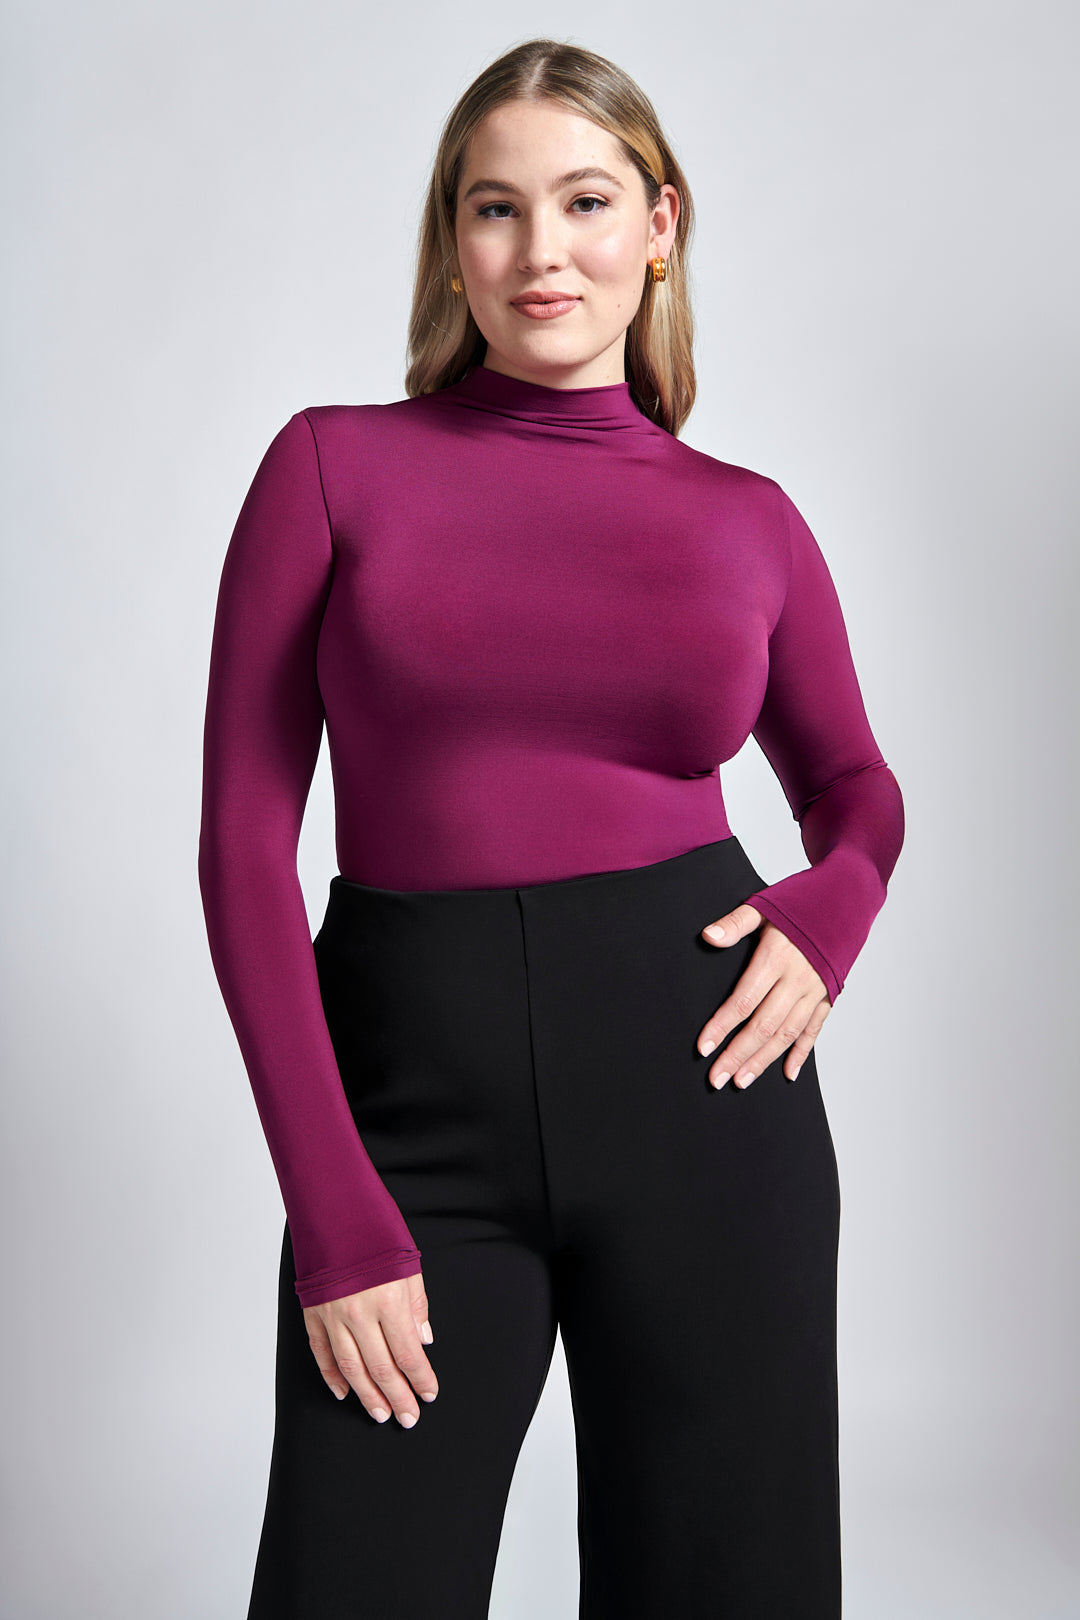 Front view of a size 12 woman wearing a fuller bust mock neck pullover in violet paired with black high waisted wide leg trousers featuring in-seam pockets.